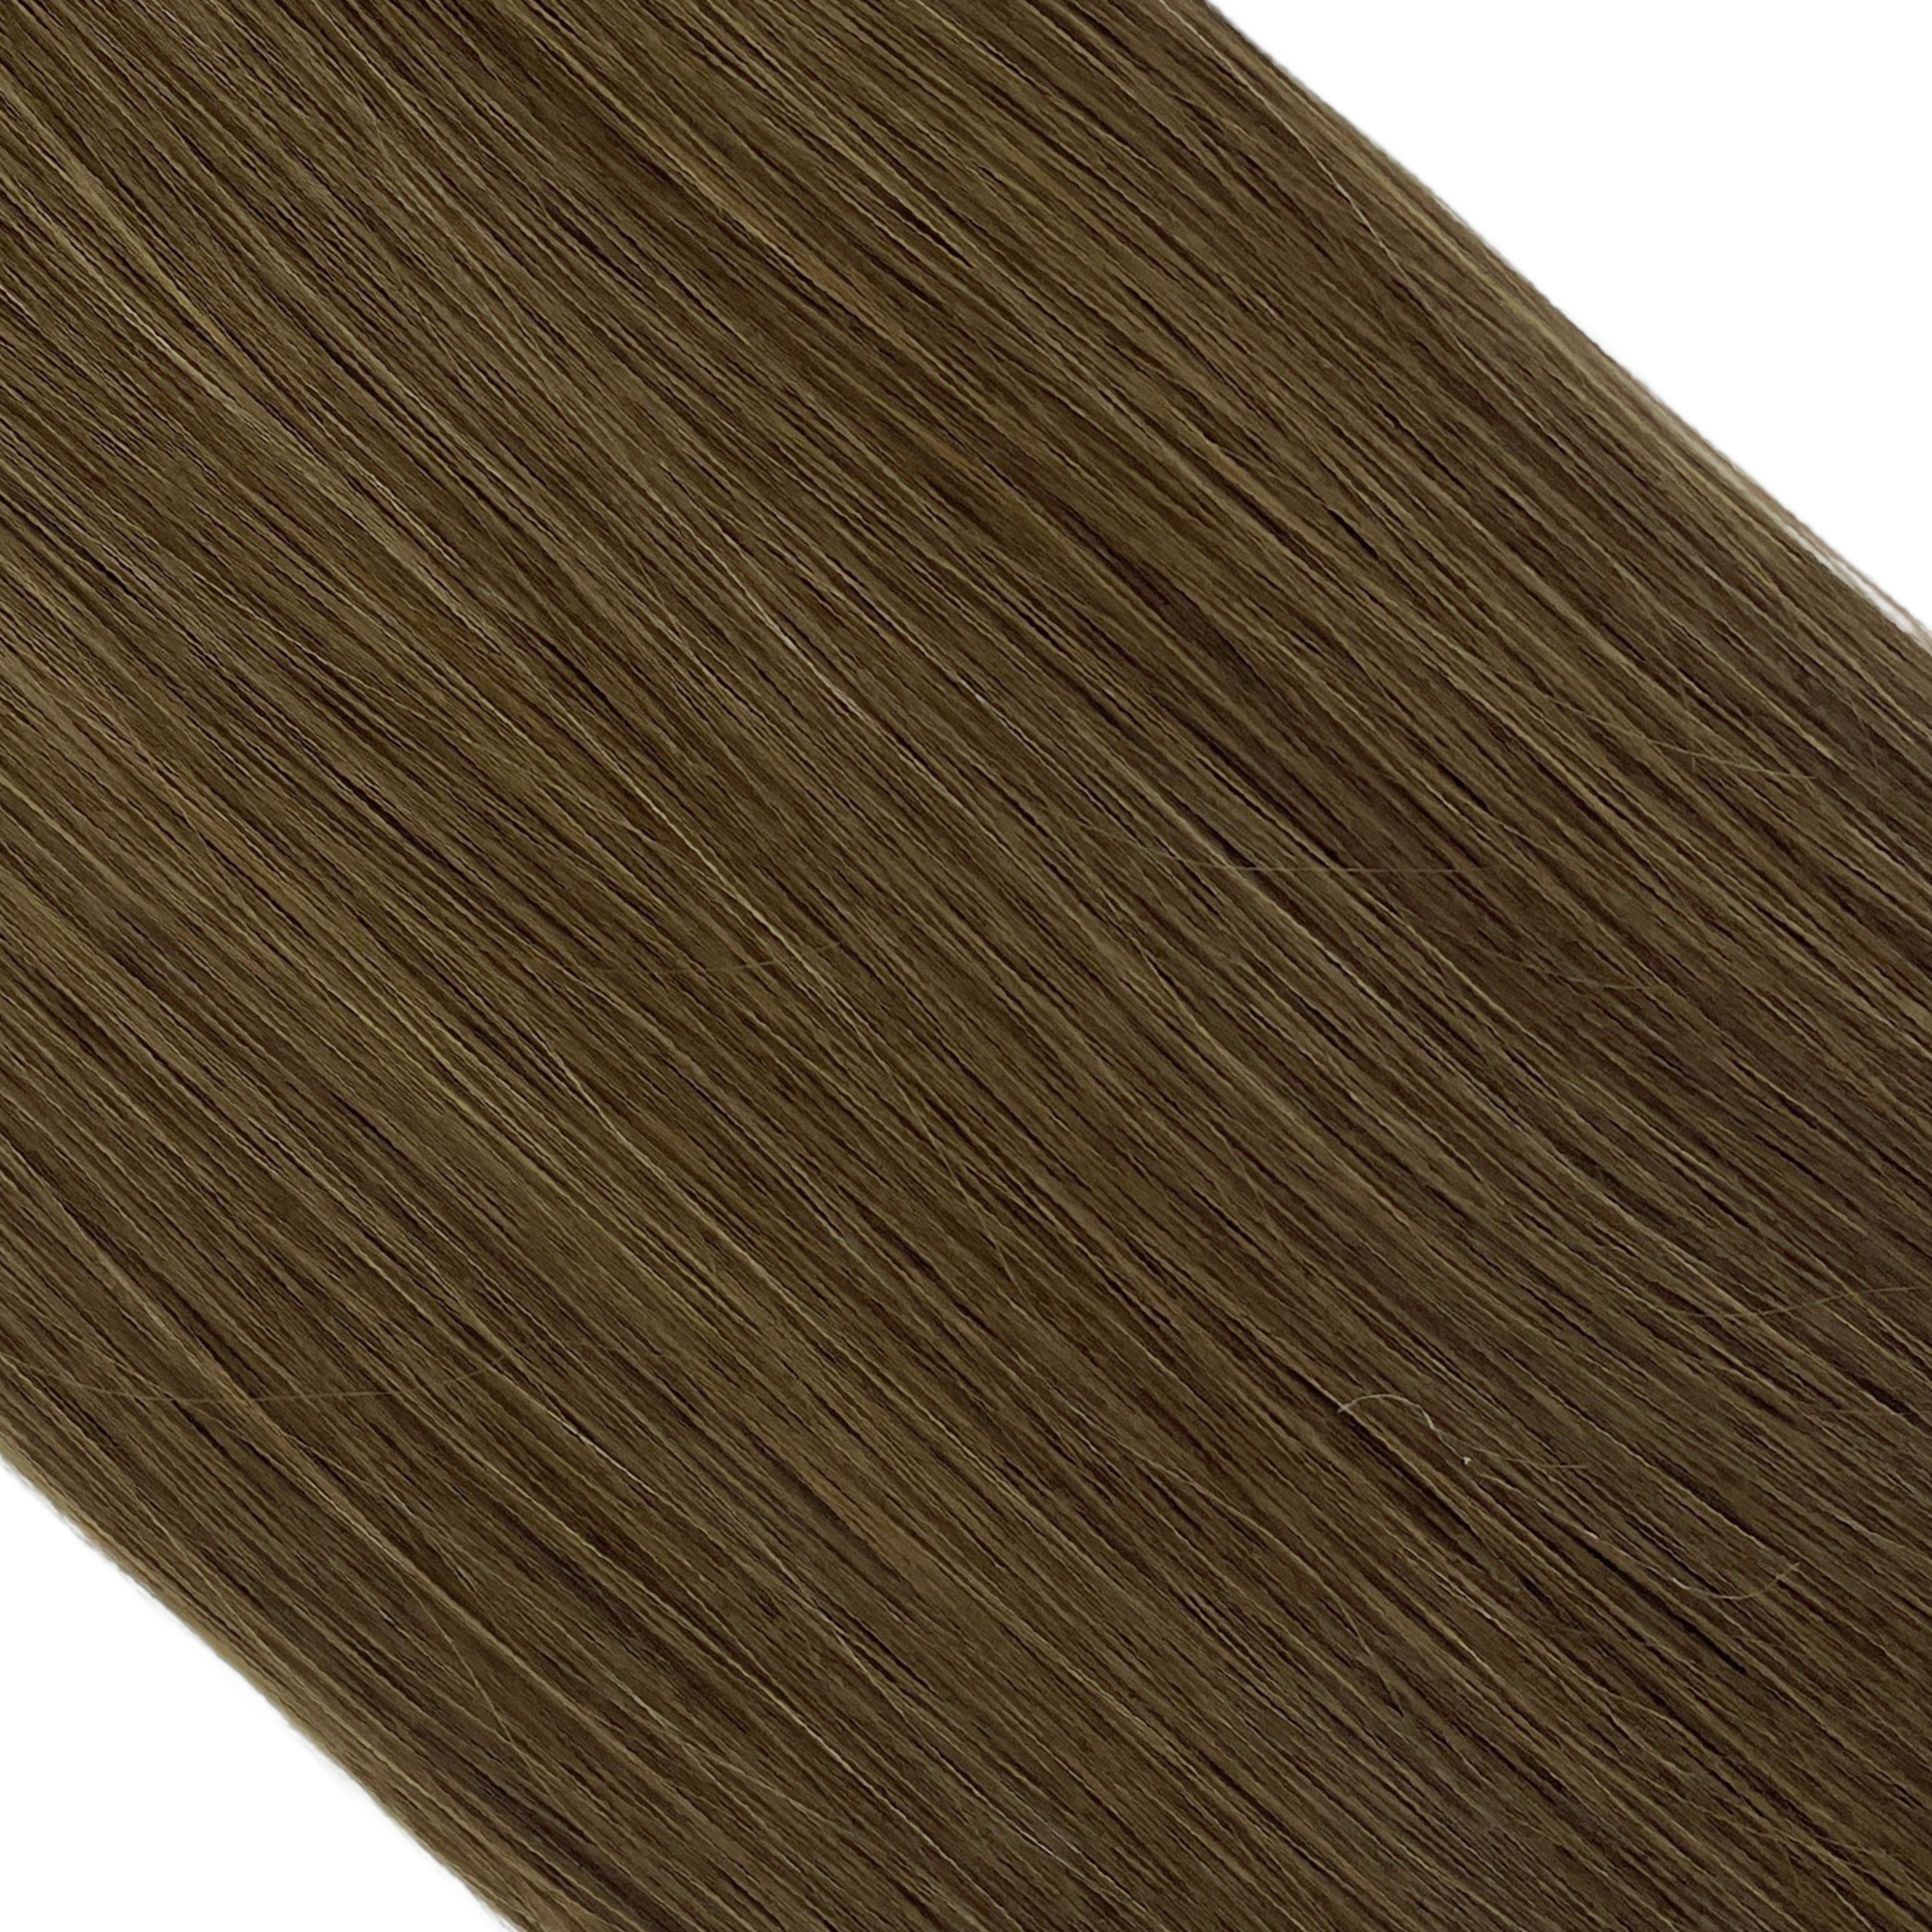 "hair rehab london 22" tape hair extensions shade swatch titled smoky brunette"